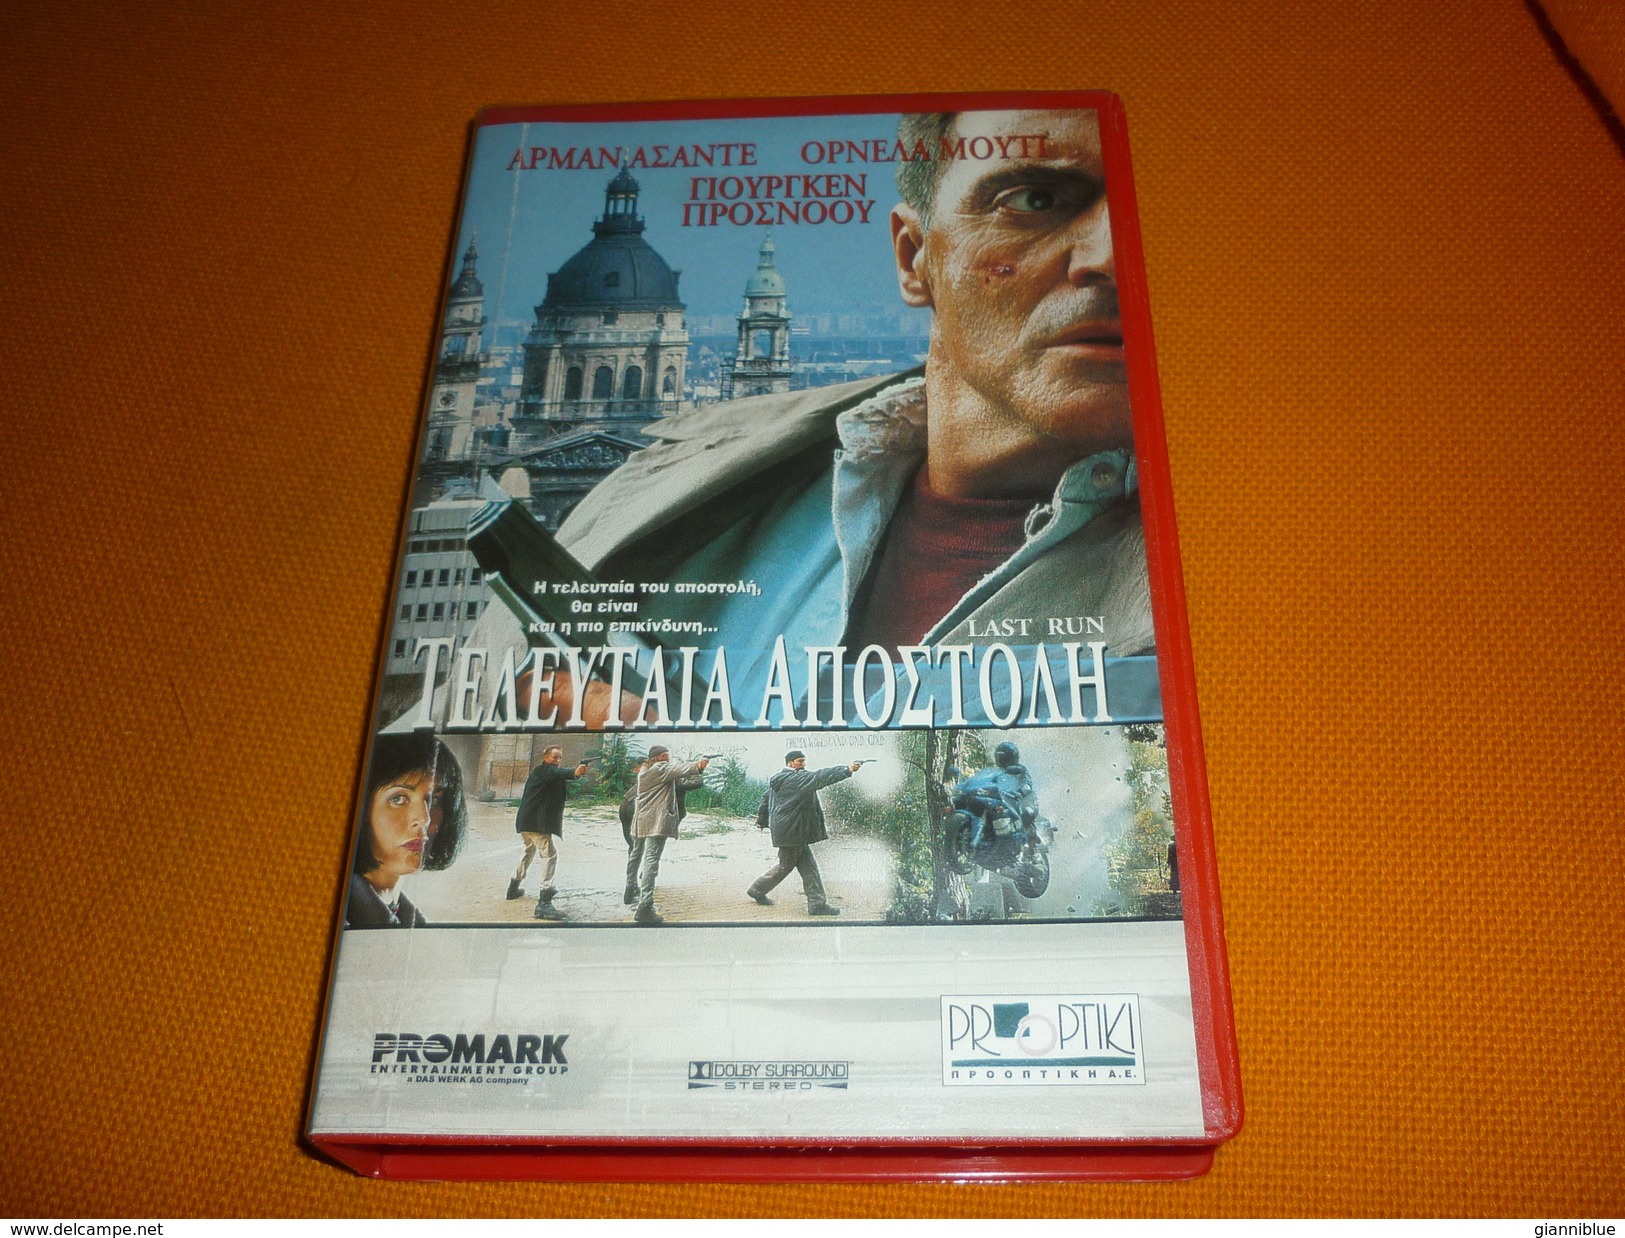 Last Run Old Greek Vhs Cassette Tape From Greece - Action, Adventure